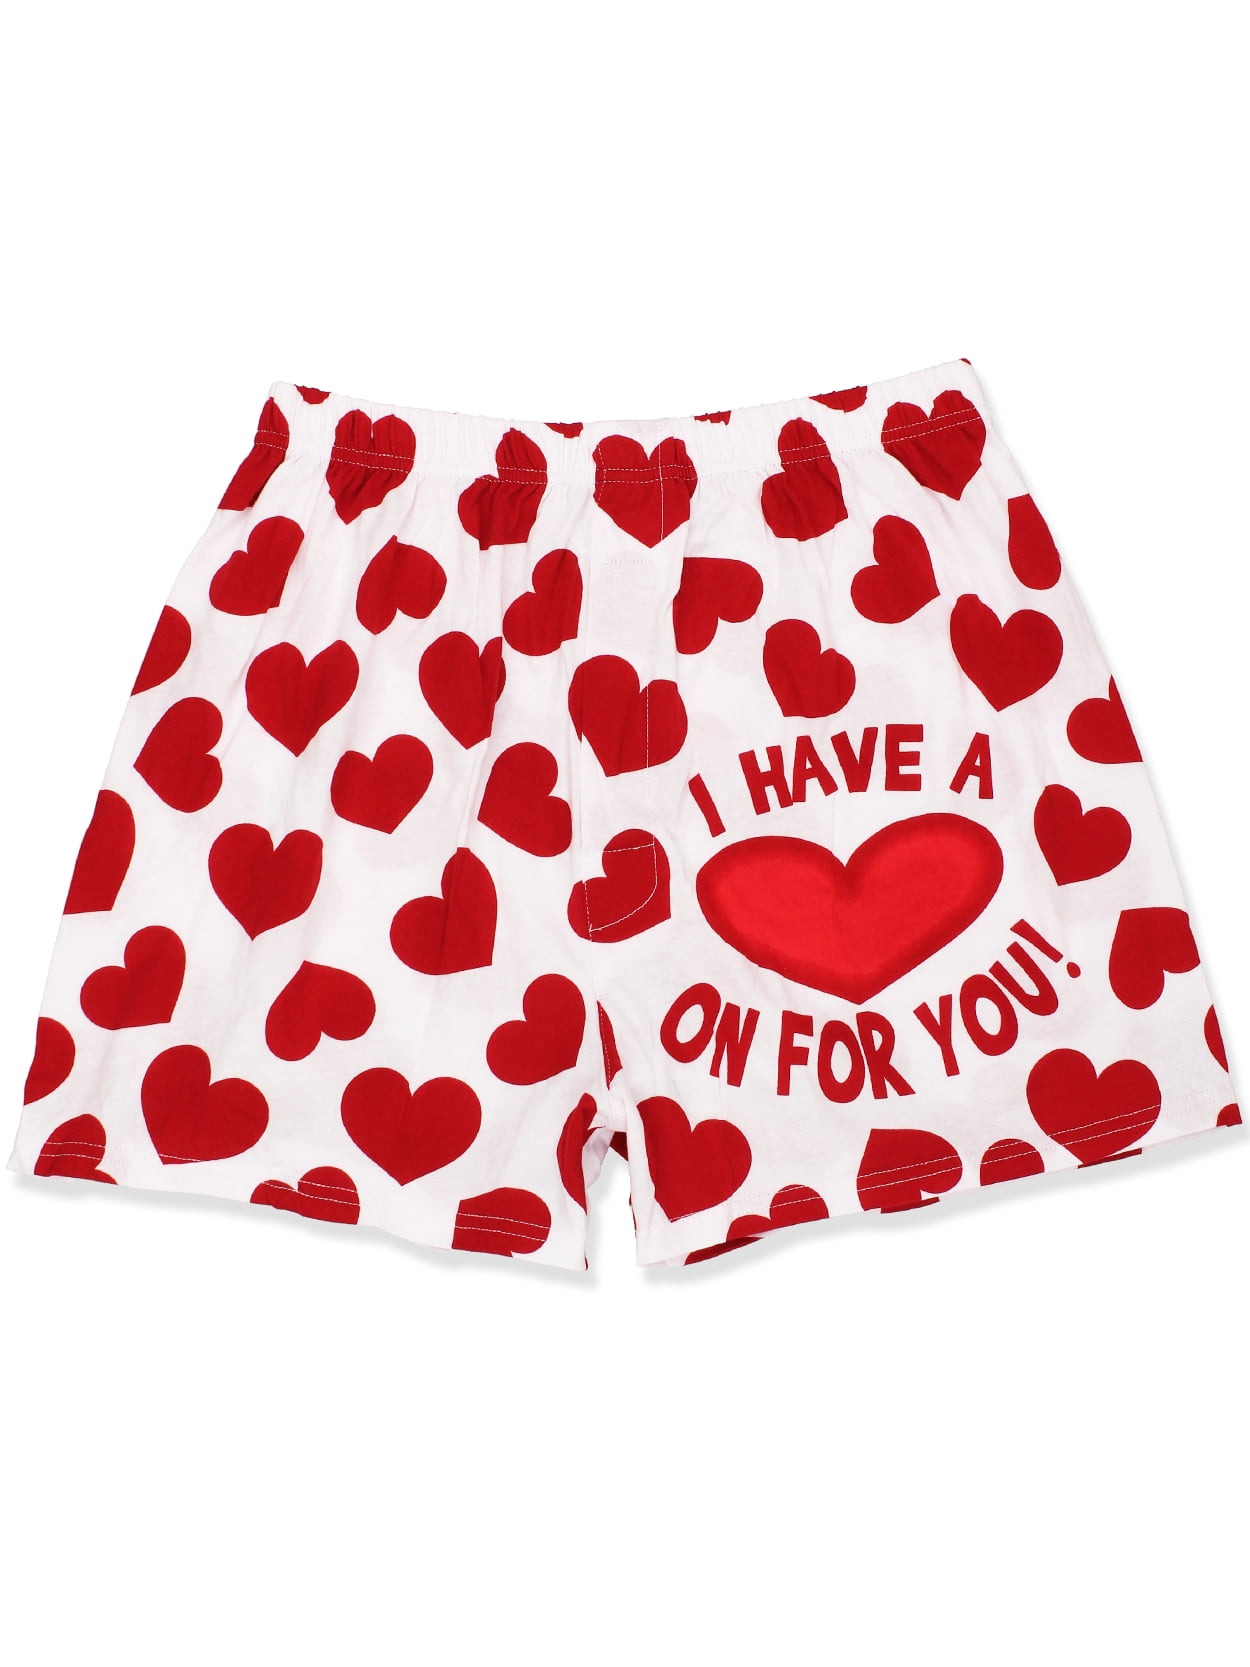 Briefly Stated 'I Have a Heart on for You' Men's Boxer Shorts Underwear ...